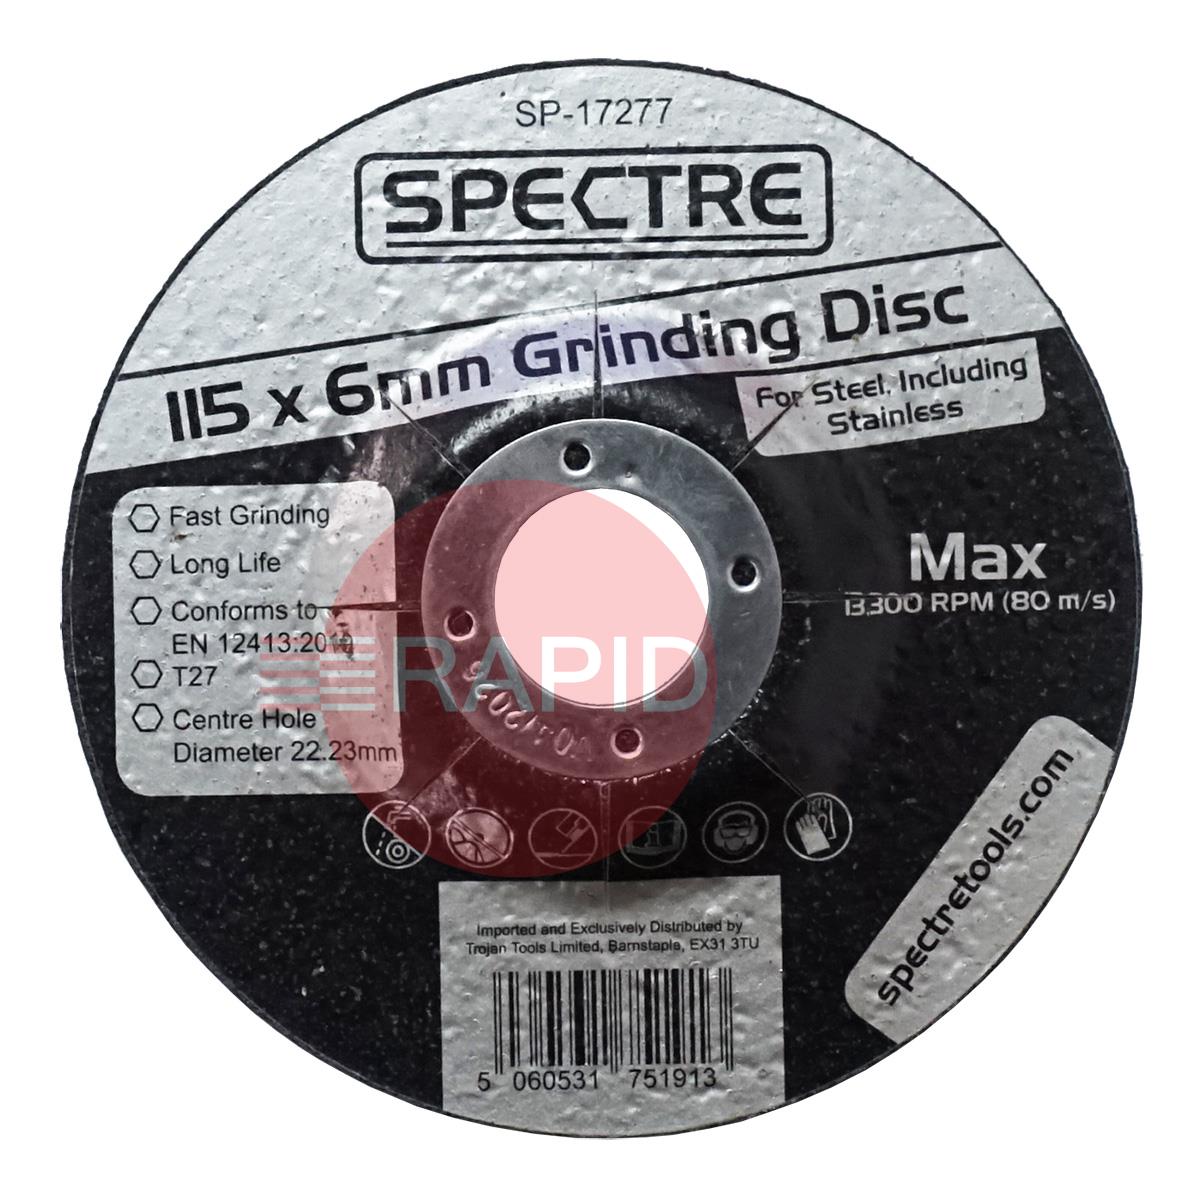 SP-17277  Spectre 115mm (4.5) Grinding Disc 6mm Thick. Grade T27 for Steel & Stainless Steel.